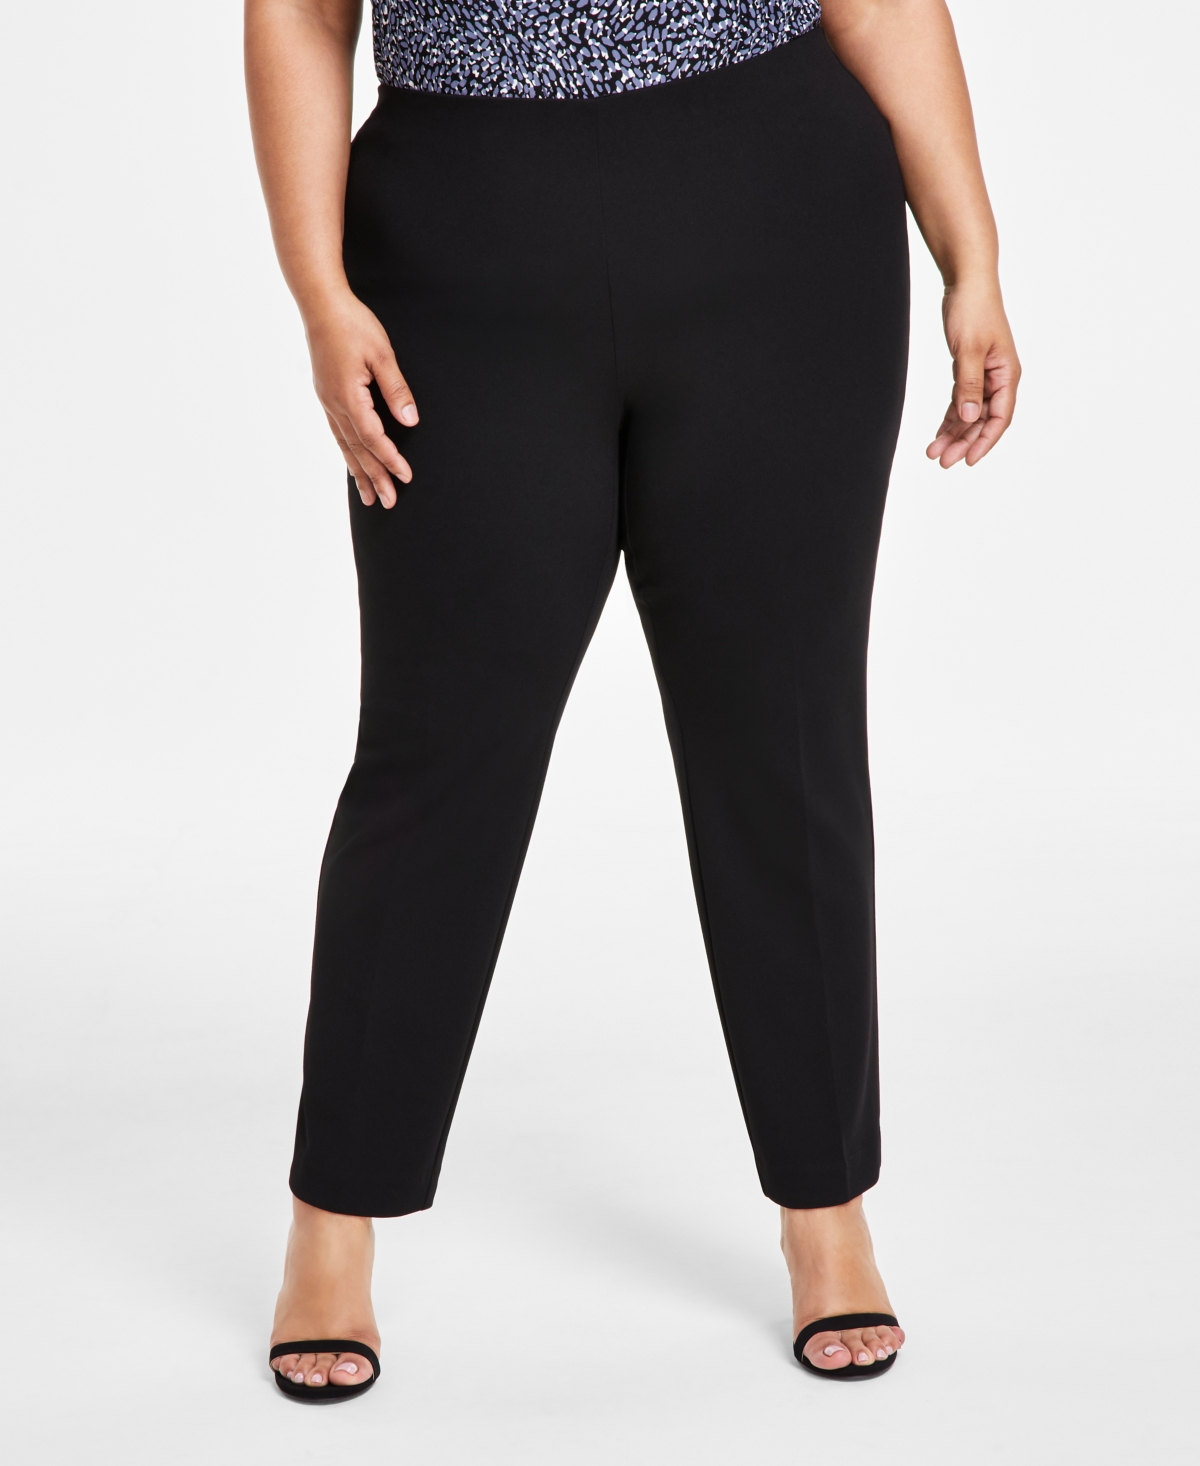 Plus Size Hollywood-Waist Pull-On Ankle Pants - Anne Black